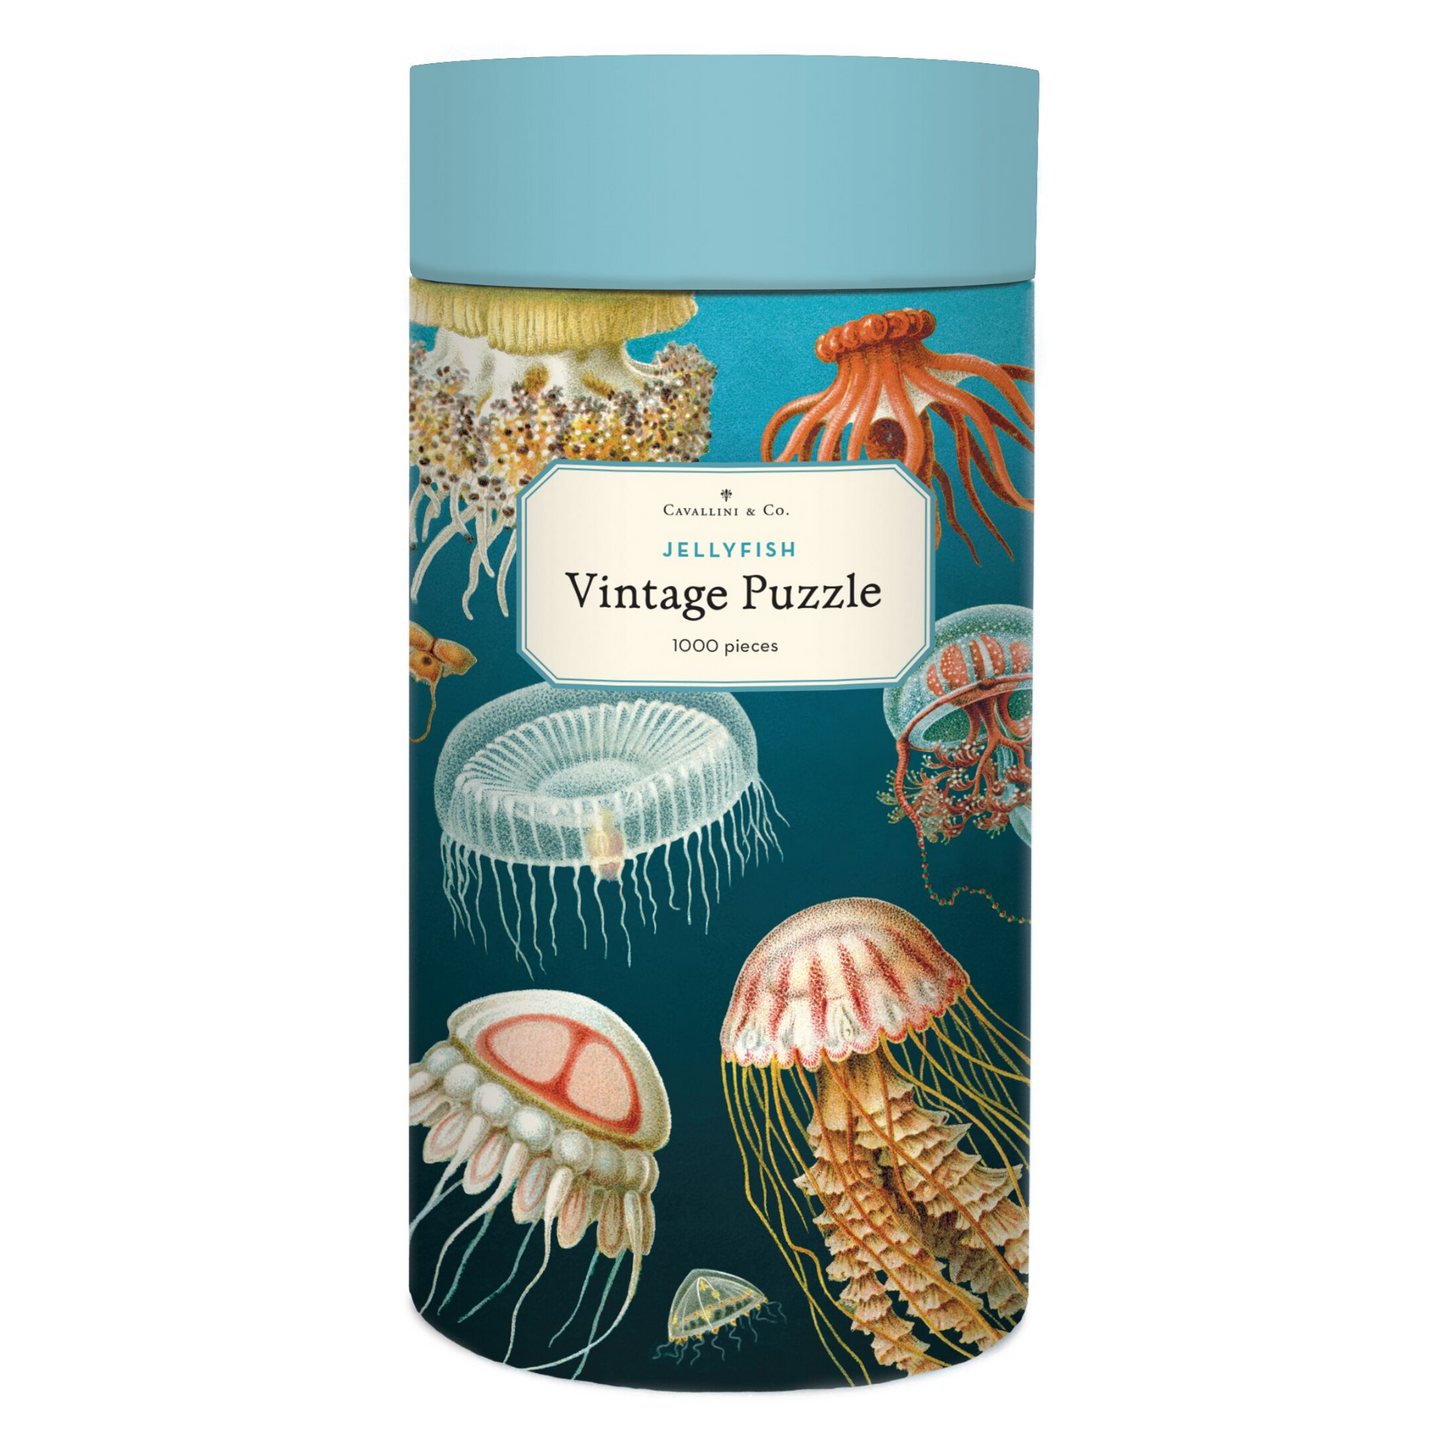 Cavallini round puzzle box with a blue lid and blue ombre case, adorned with vintage jellyfish illustrations.